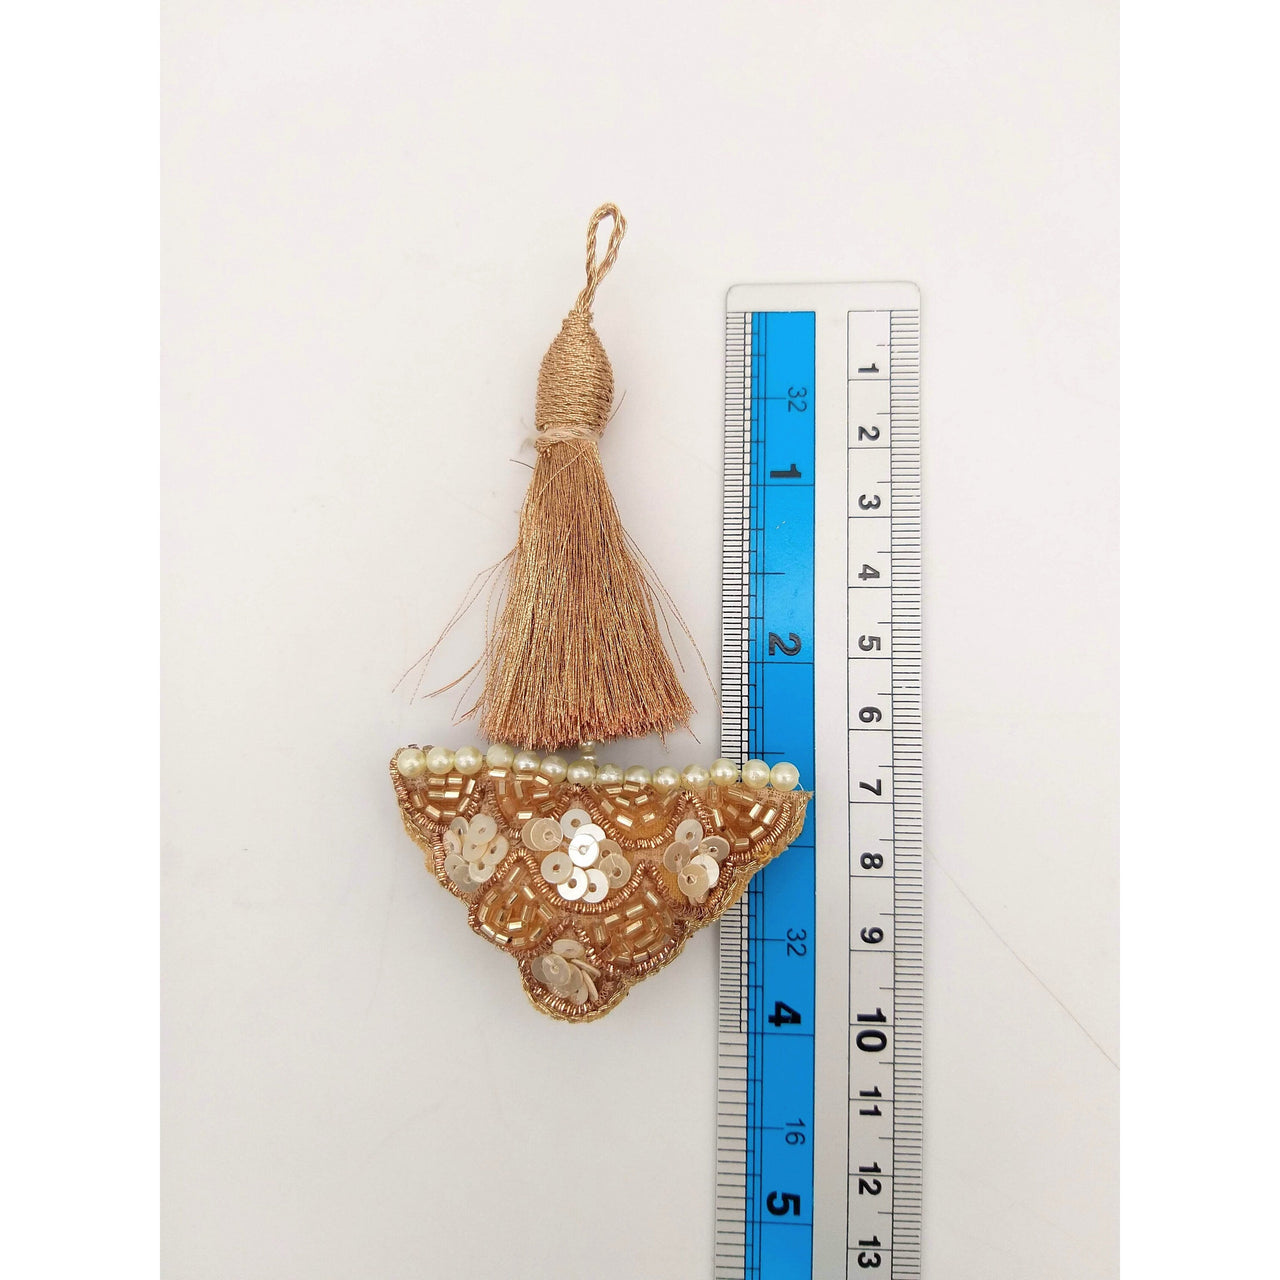 Copper Tassels In Gold  and White Bead and Sequins, Indian Latkans, Blouse Latkan